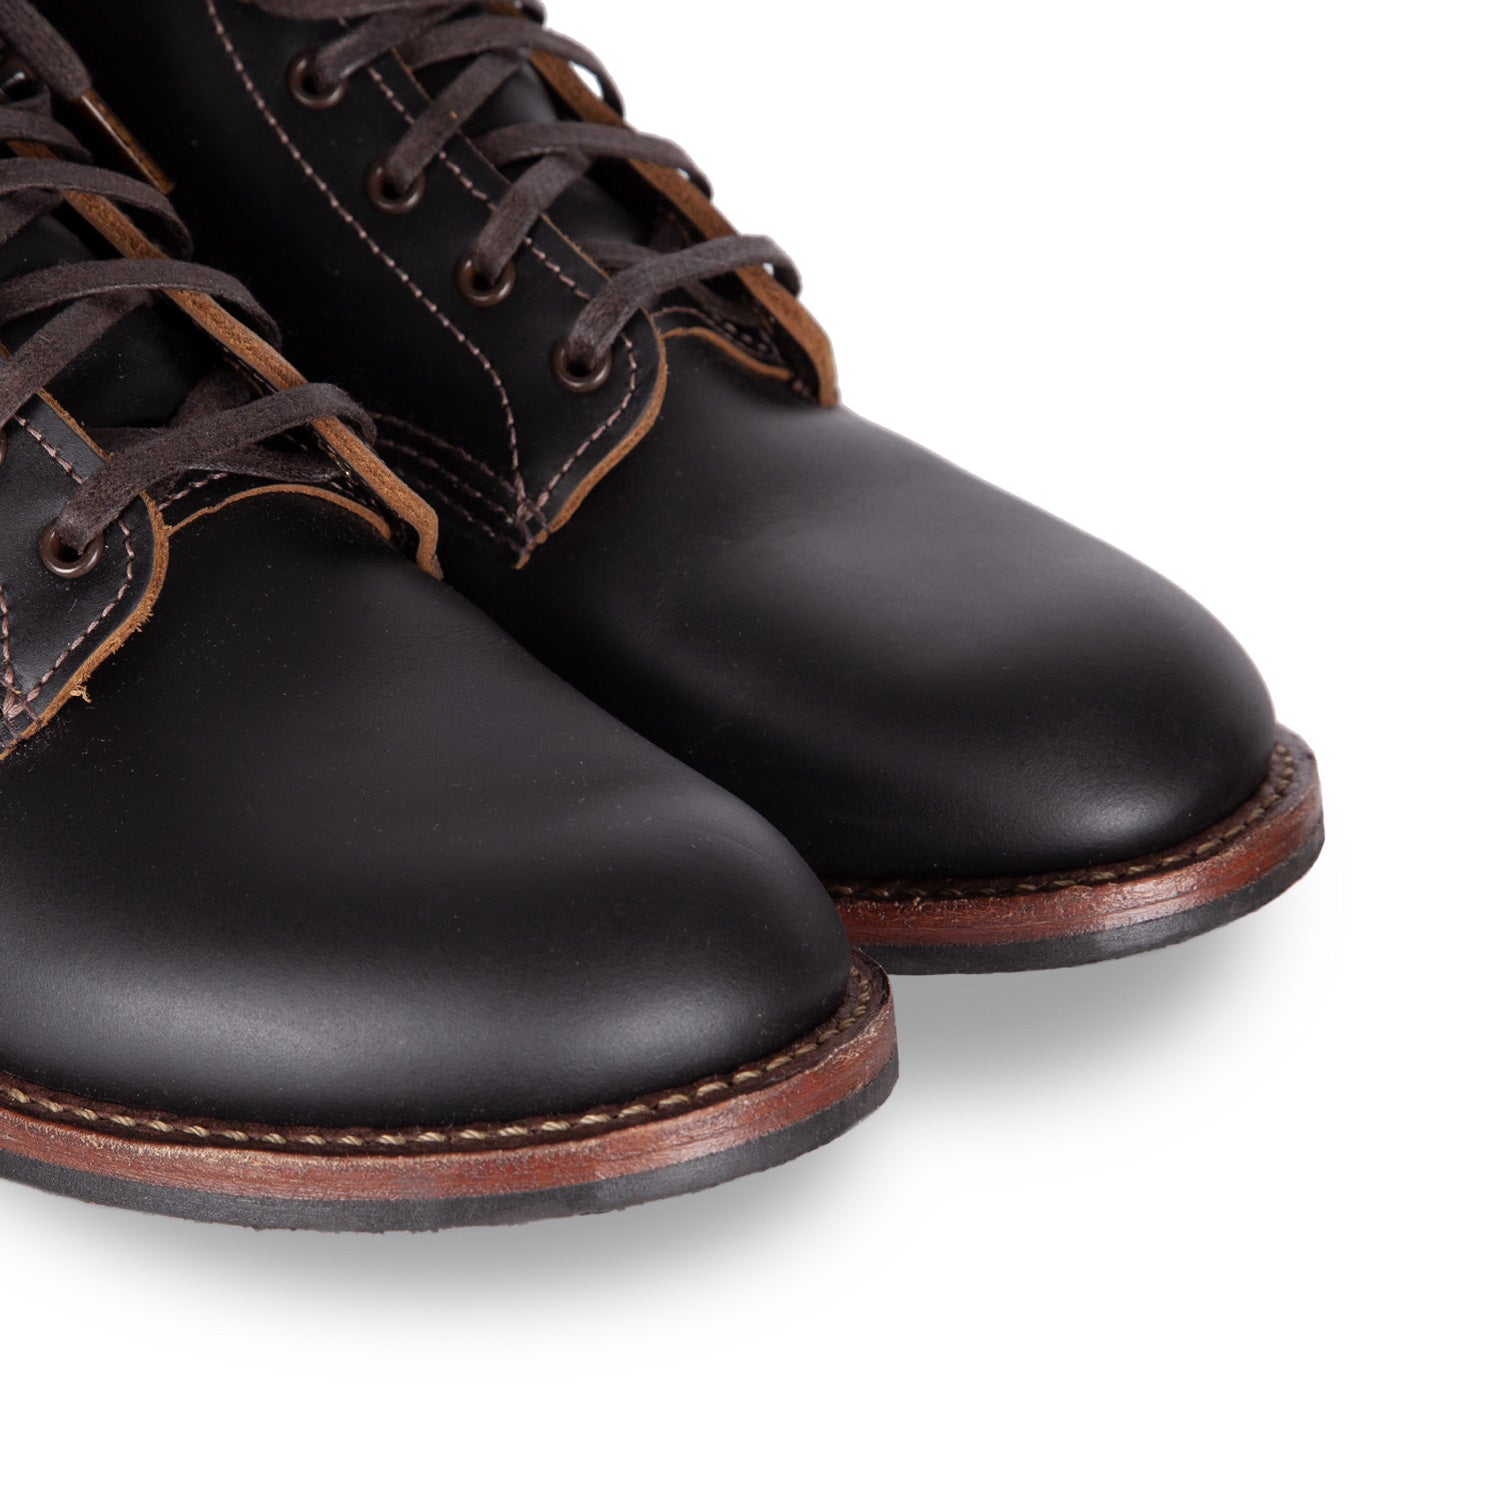 red wing 96 flat toe beckman